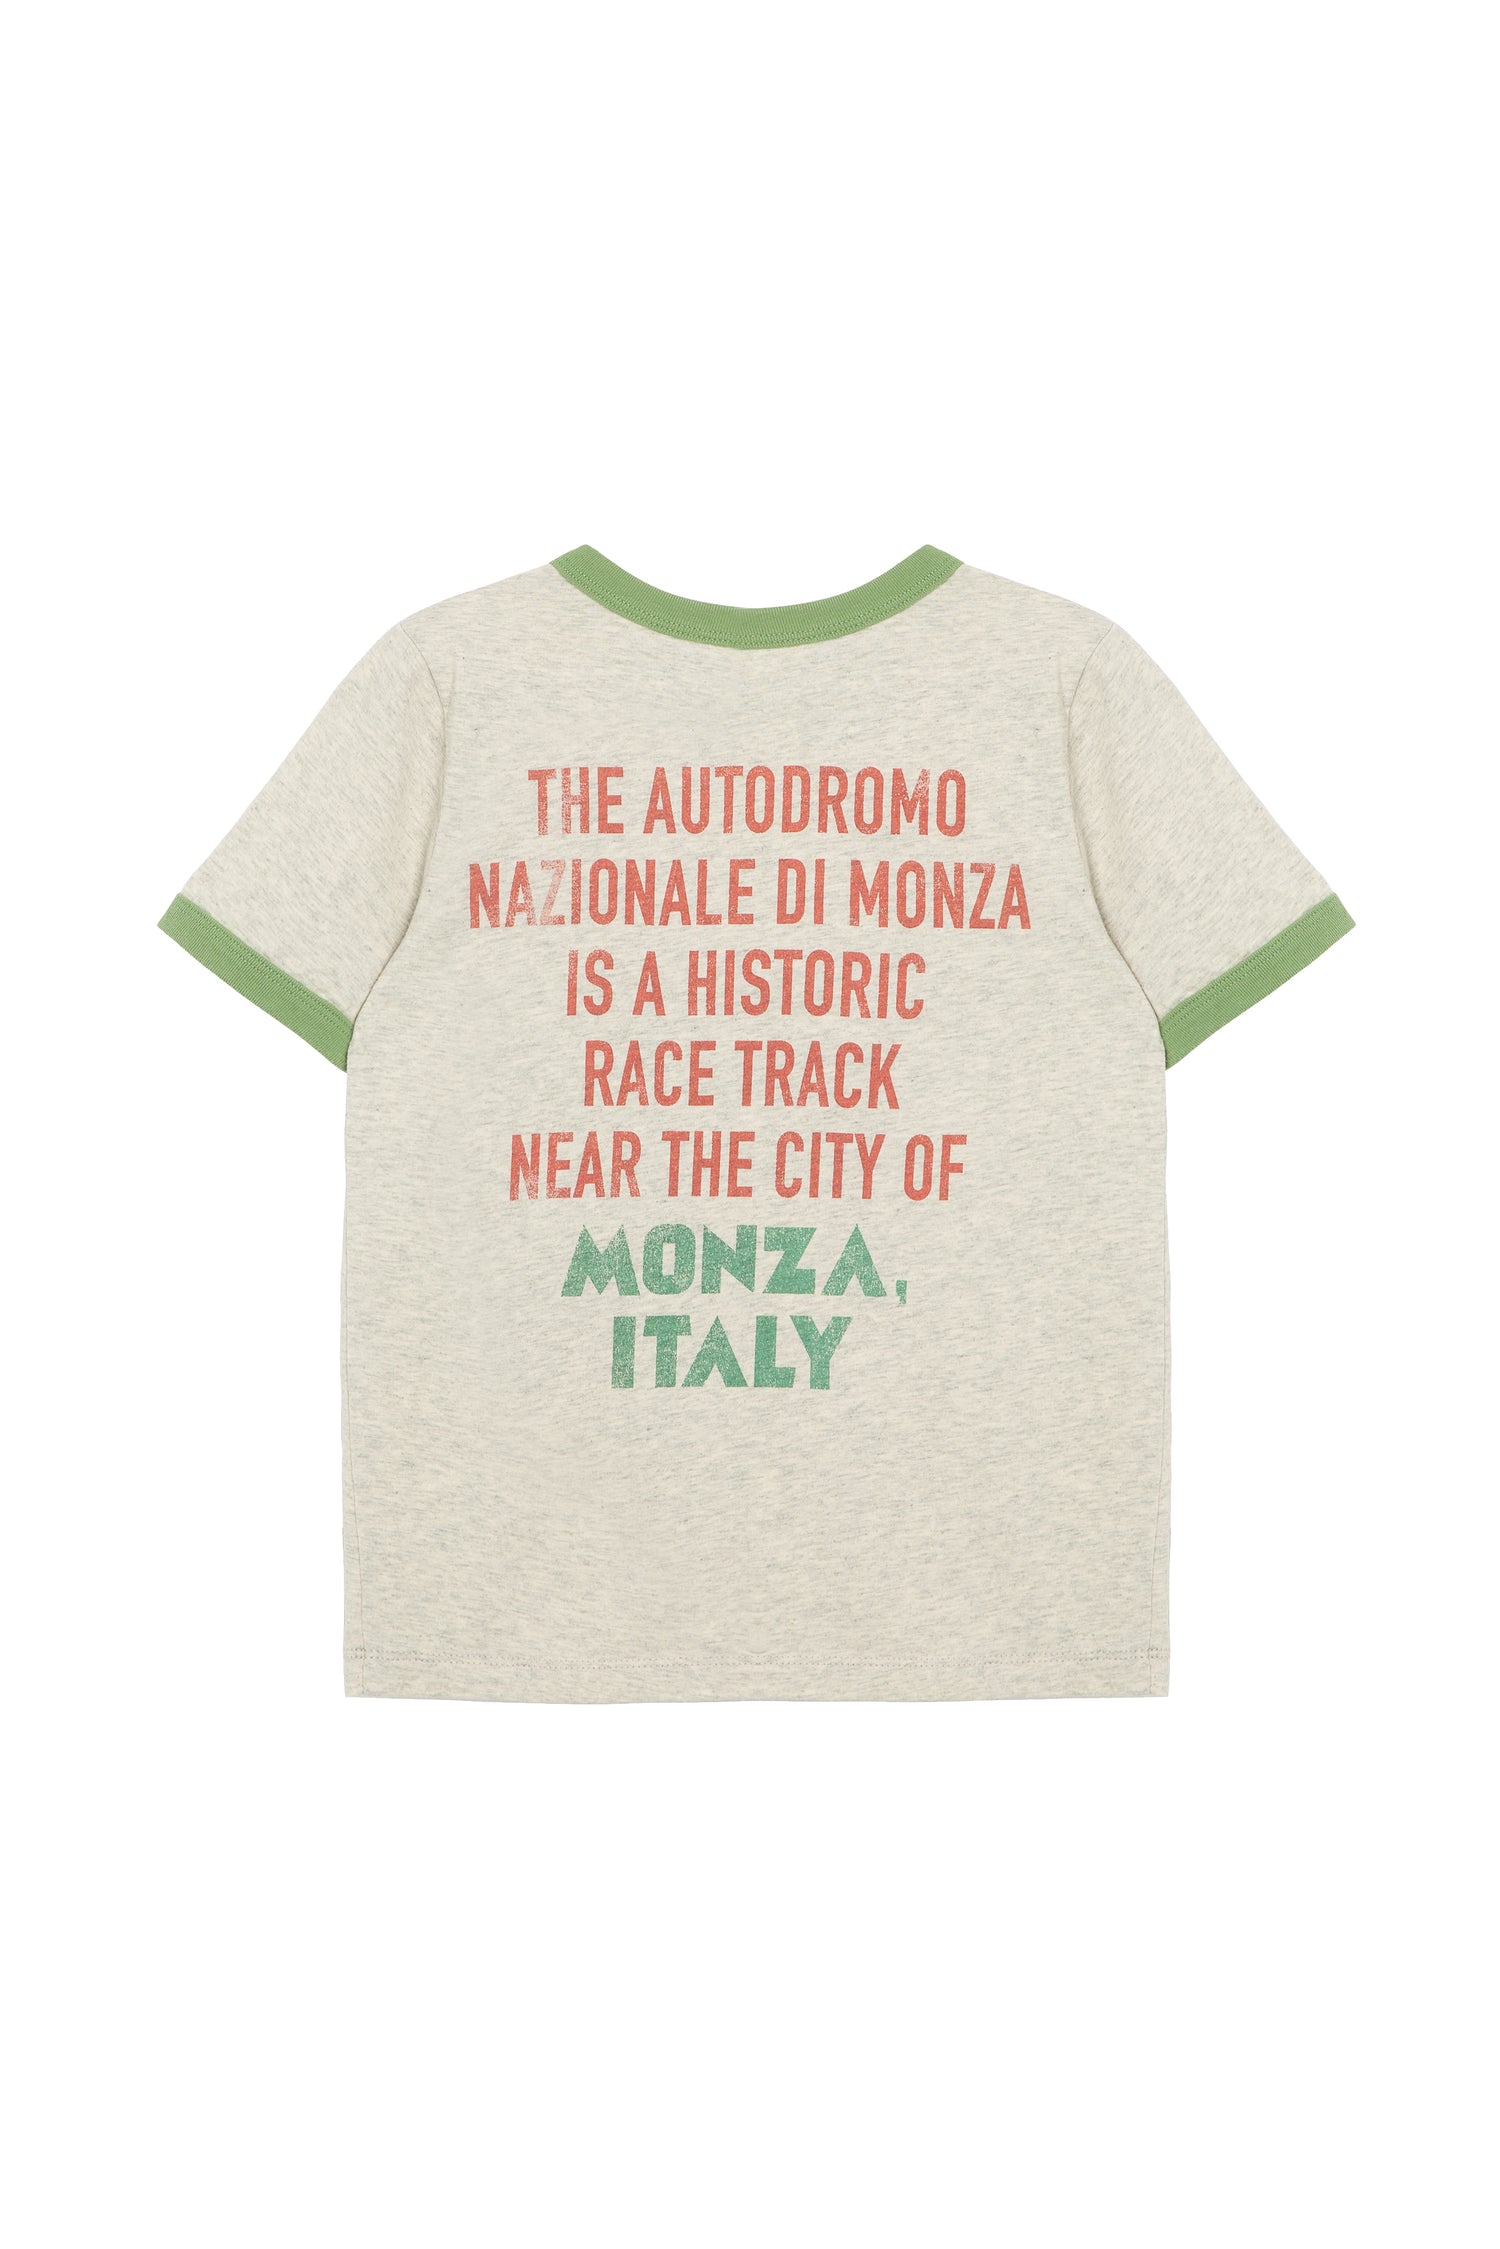 Back of gray and green t-shirt with text about the Monza race track